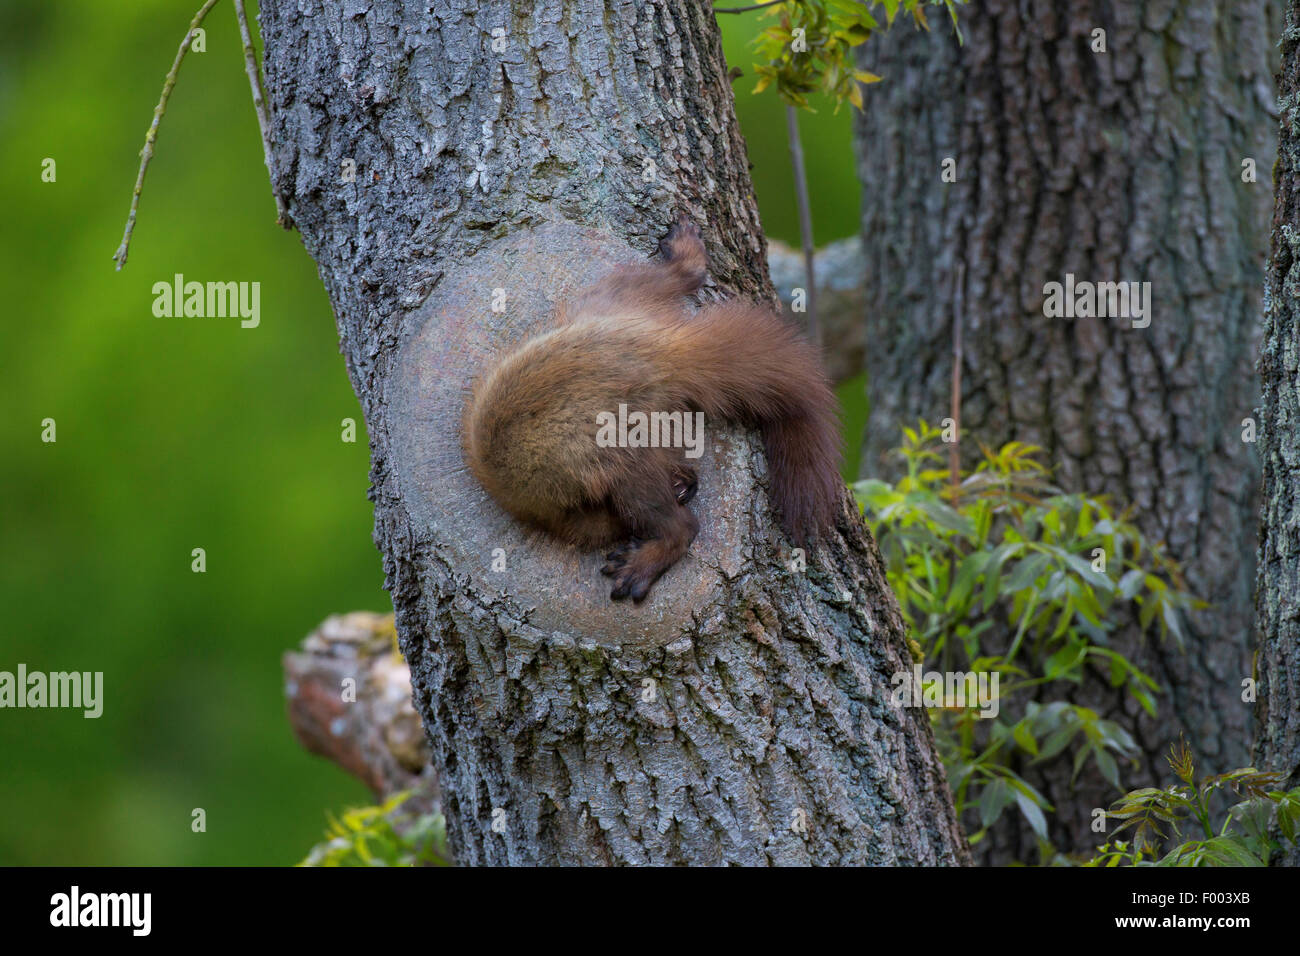 European pine marten (Martes martes), pine marten at a tree hole, going nesting a breeding cave, Germany Stock Photo